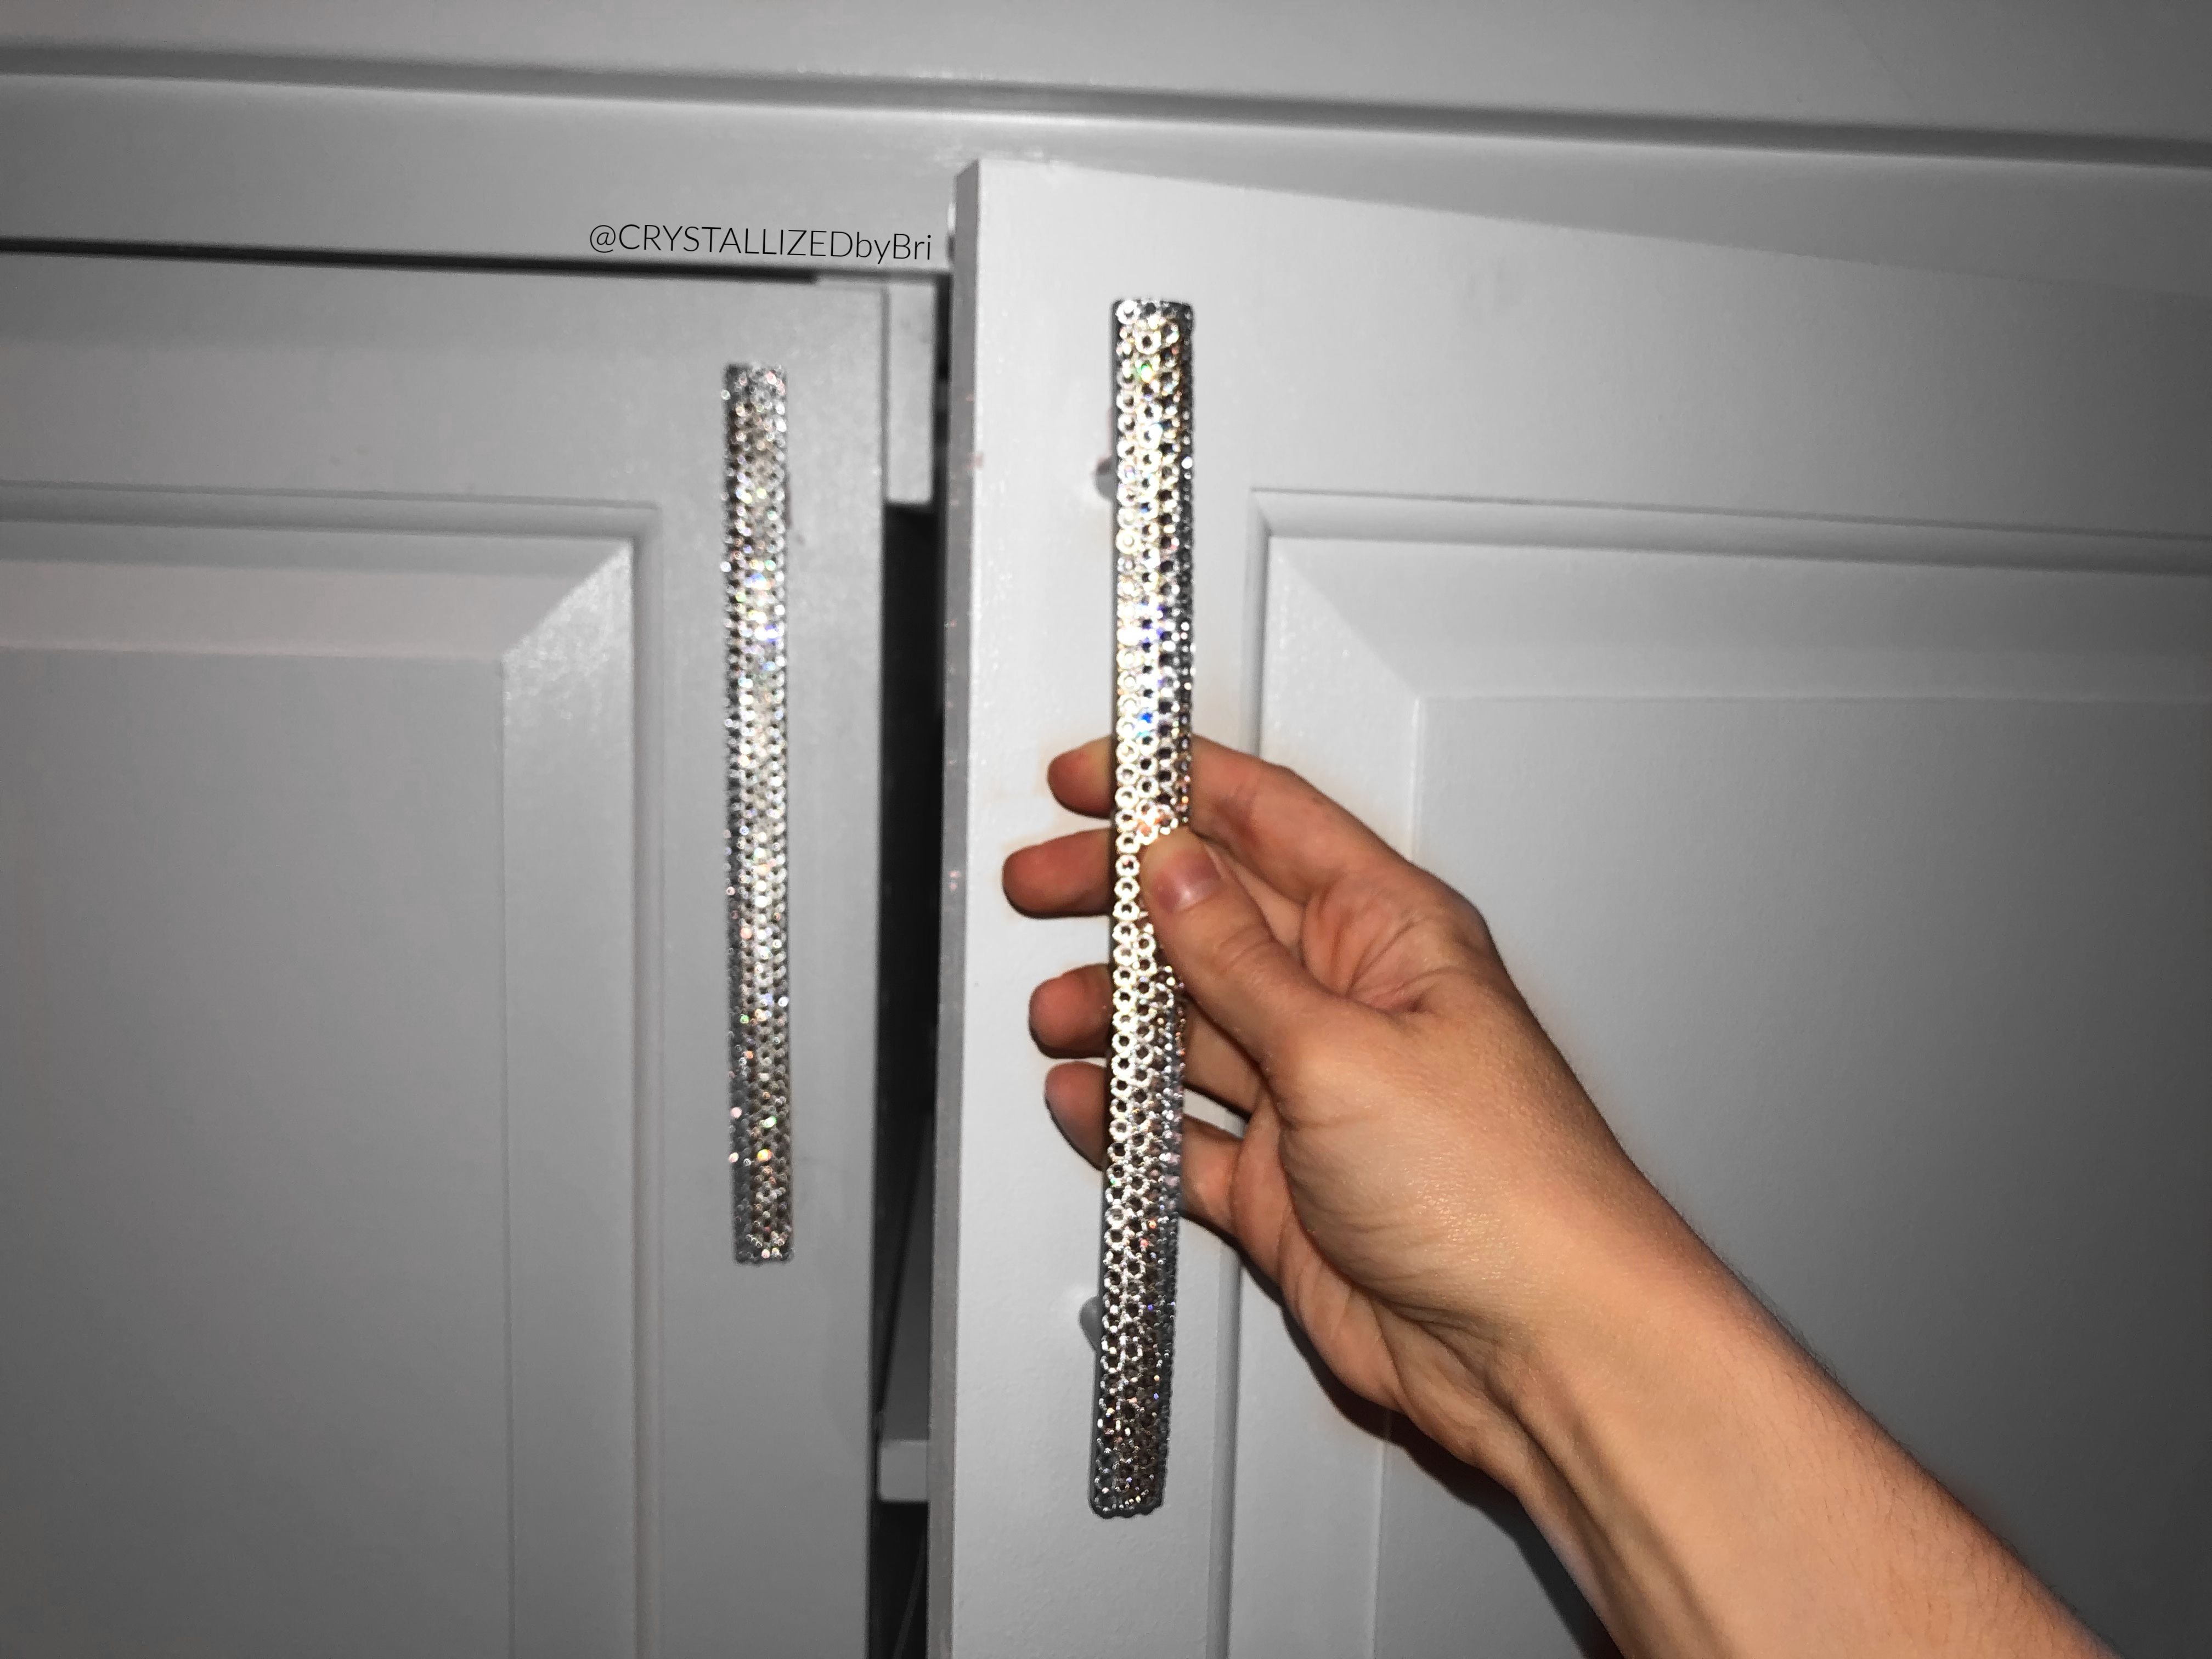 Buy Handmade Pair Crystallized Satin Nickel Cabinet Handle Pulls Home Decor  Bling European Crystals Bedazzled, made to order from CRYSTALL!ZED by Bri,  LLC